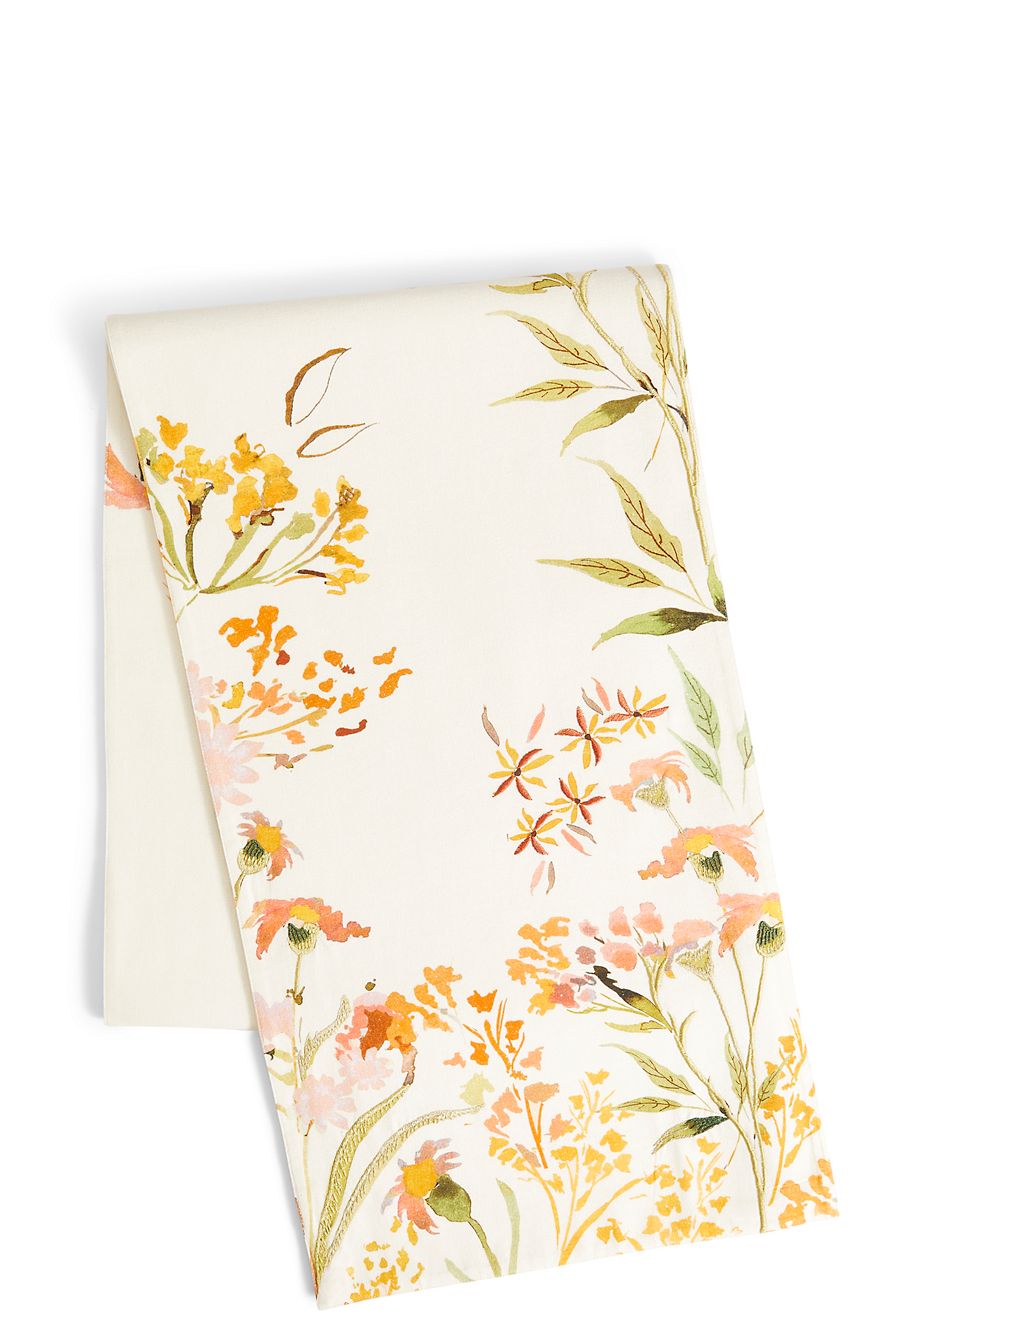 Painterly Floral Print Runner 1 of 2